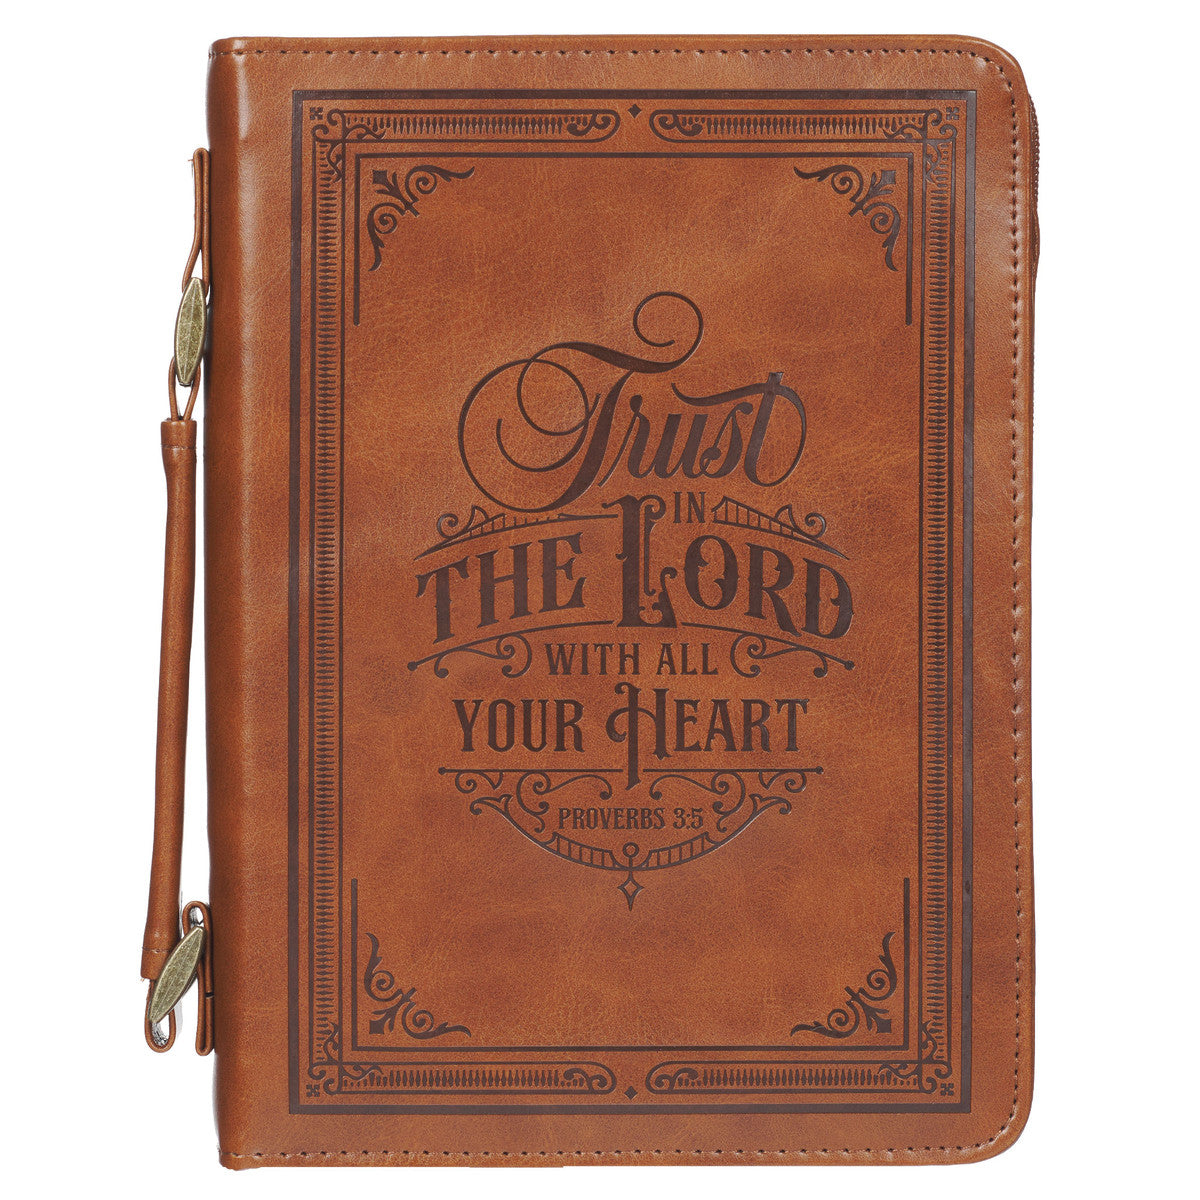 Trust in the Lord Honey-brown Faux Leather Classic Bible Cover - Proverbs 3:5